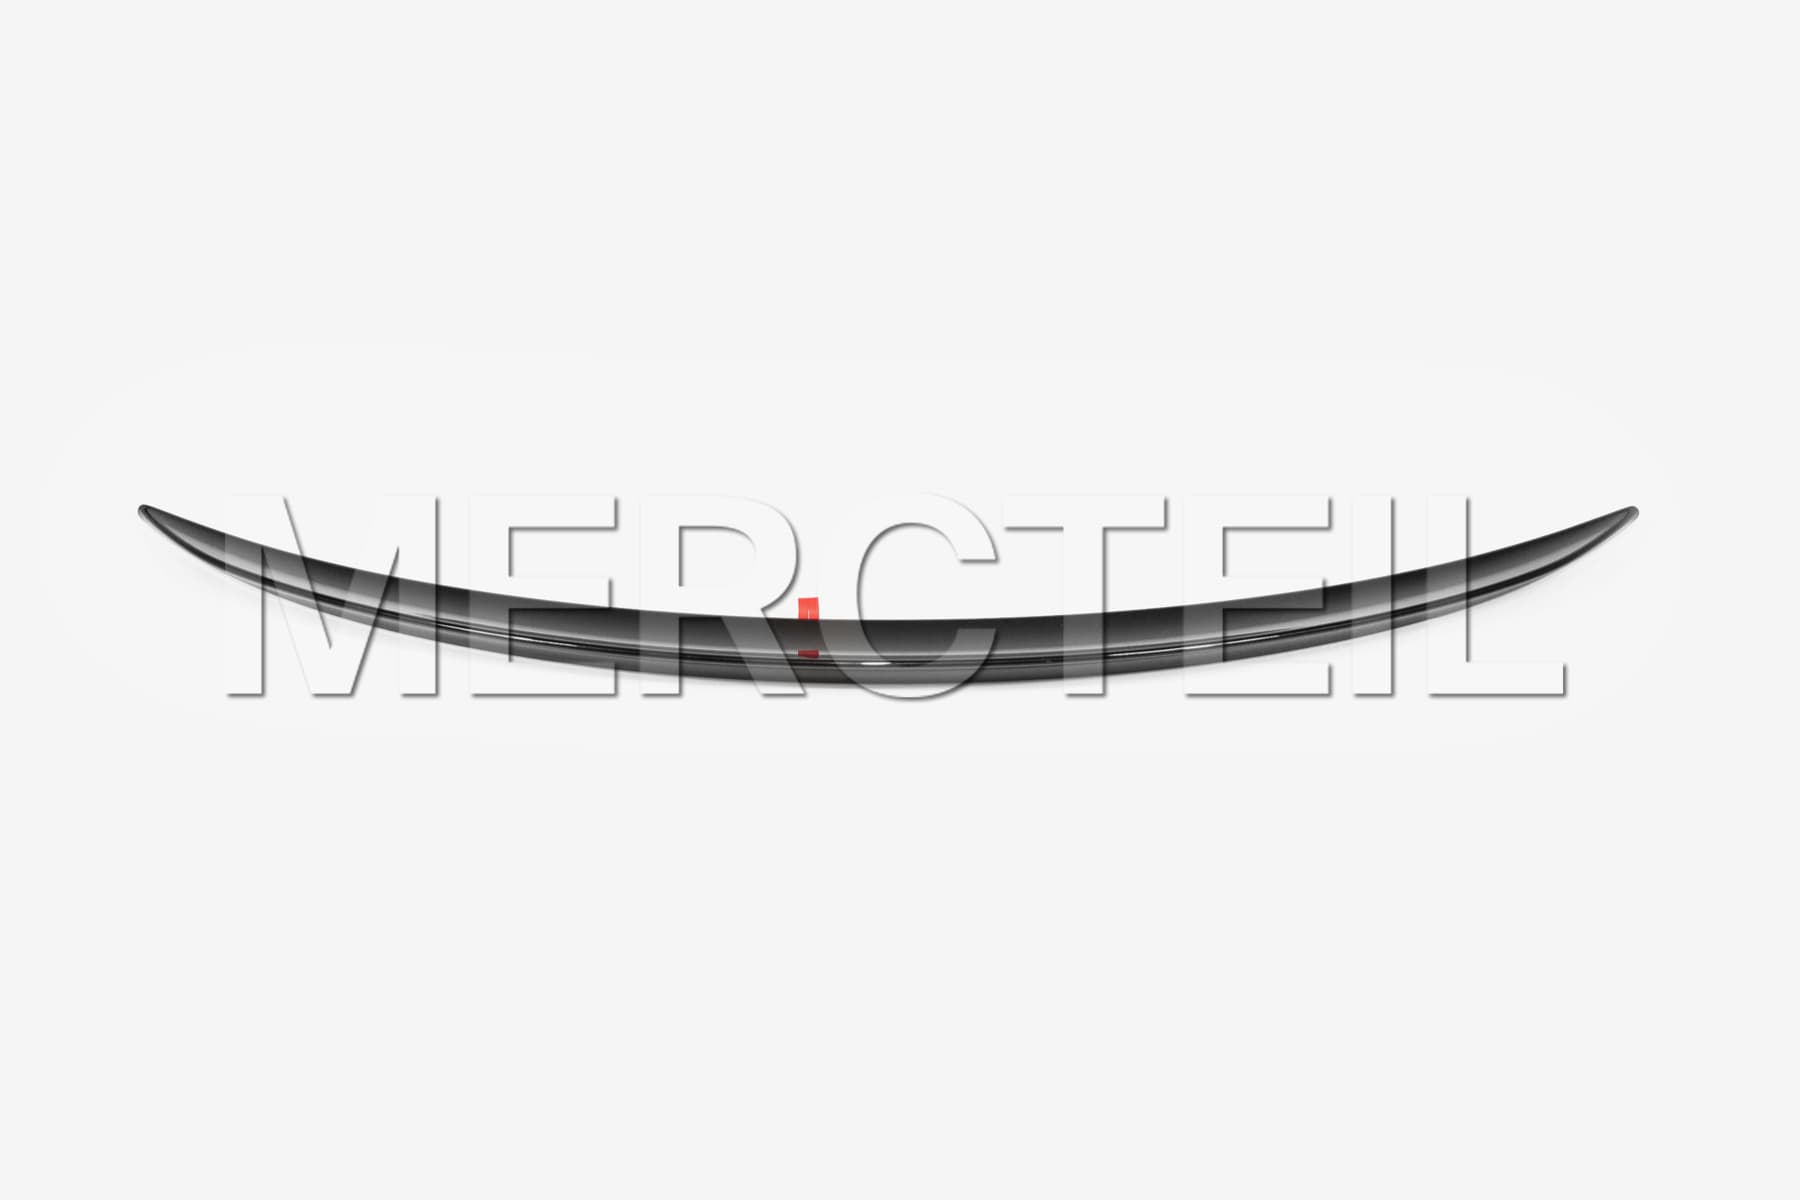 AMG Sport Rear Spoiler for GLC-Class Coupe (part number: A25379000009040)